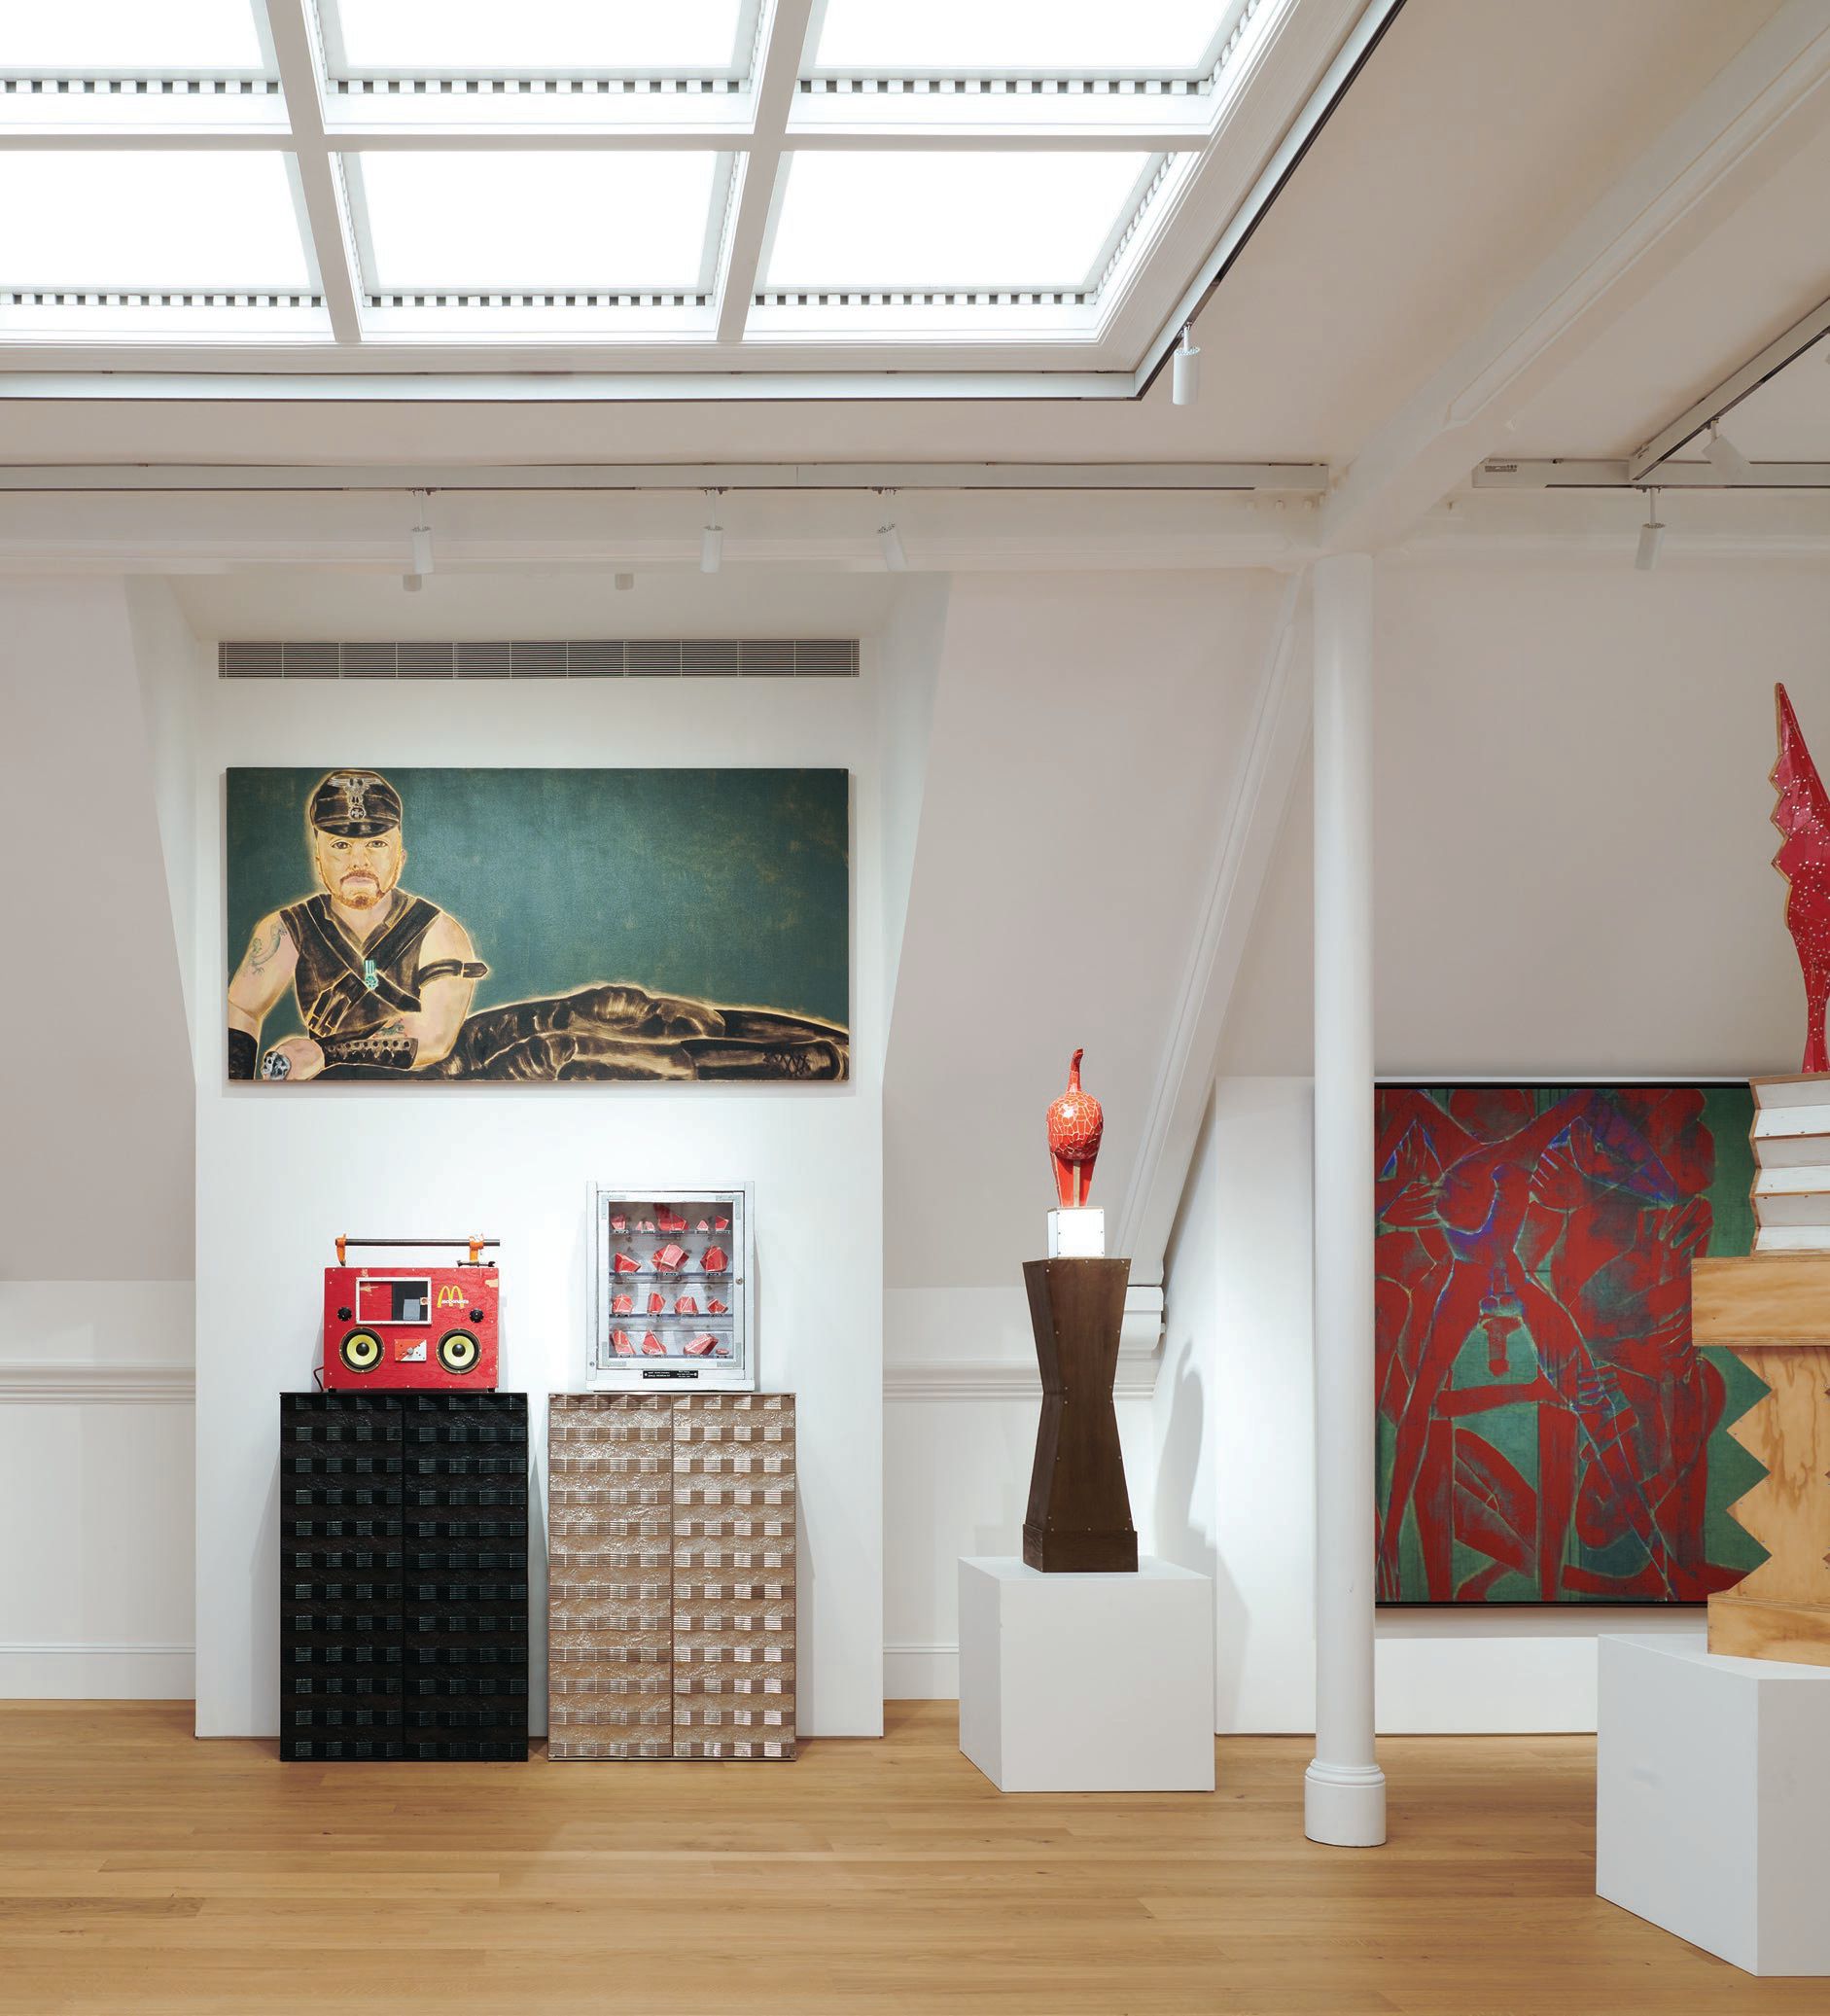 Upstairs at the Peter Marino Art Foundation, the Meeting Room features a portrait of Peter Marino by Francesco Clemente (center) and several sculptures by Tom Sachs. PHOTO © JASON SCHMIDT/COURTESY OF PETER MARINO ARCHITECT